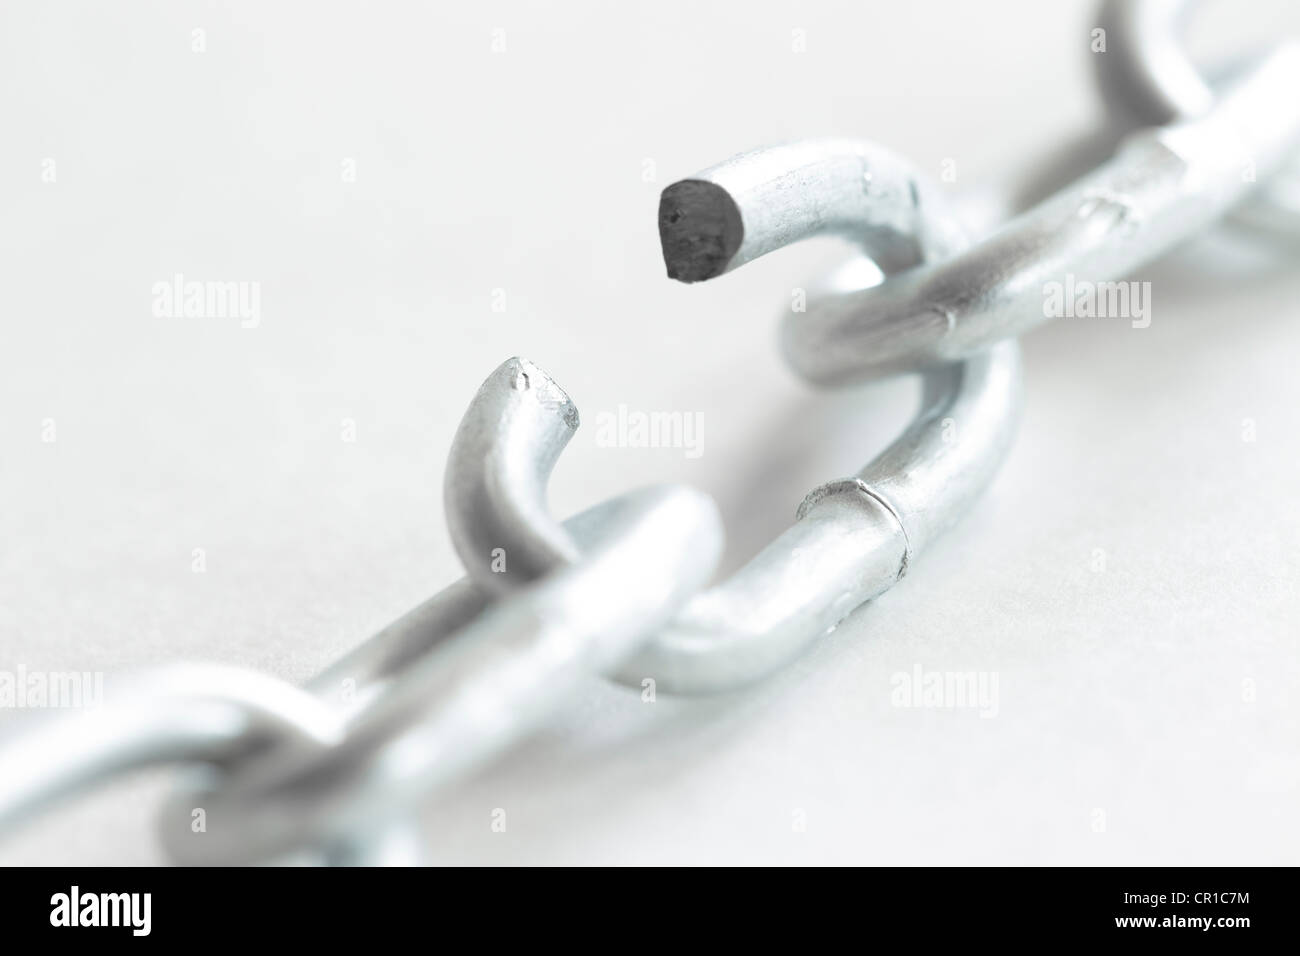 Steel chain with an open link, symbolic image for 'a chain is only as strong as its weakest link' Stock Photo